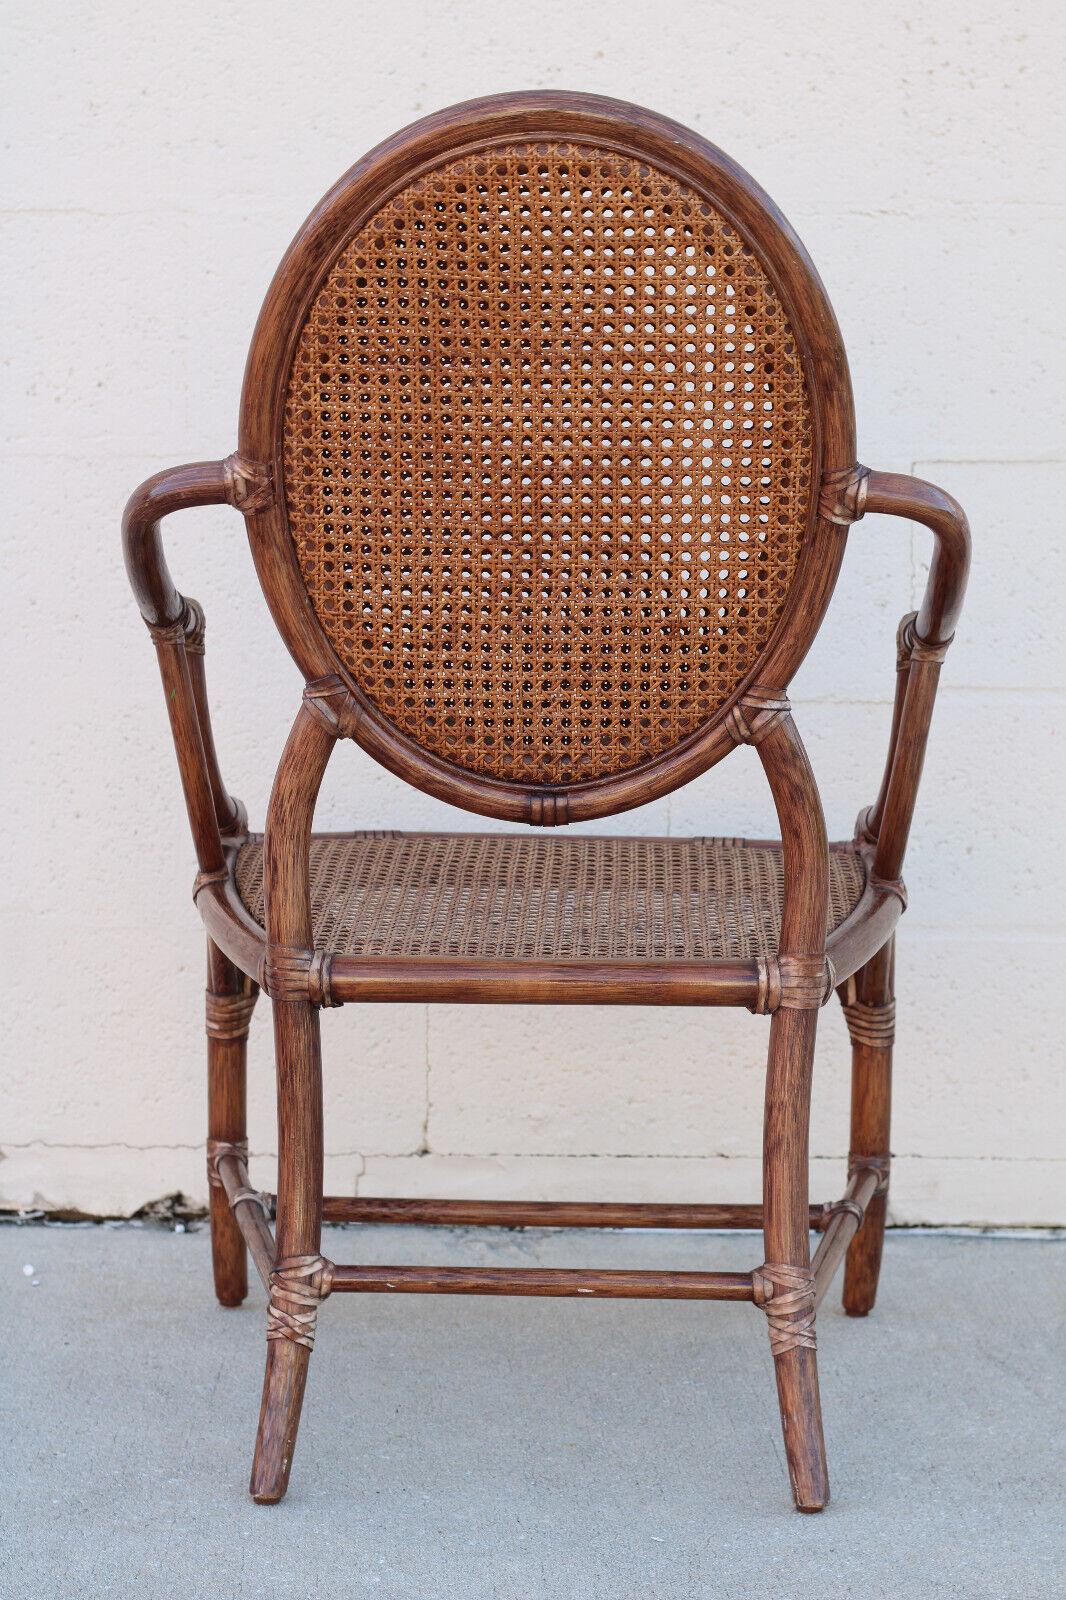 Elinor McGuire Rattan Cane Oval Back Dining Arm Chairs, a Set of Four In Good Condition For Sale In Vero Beach, FL